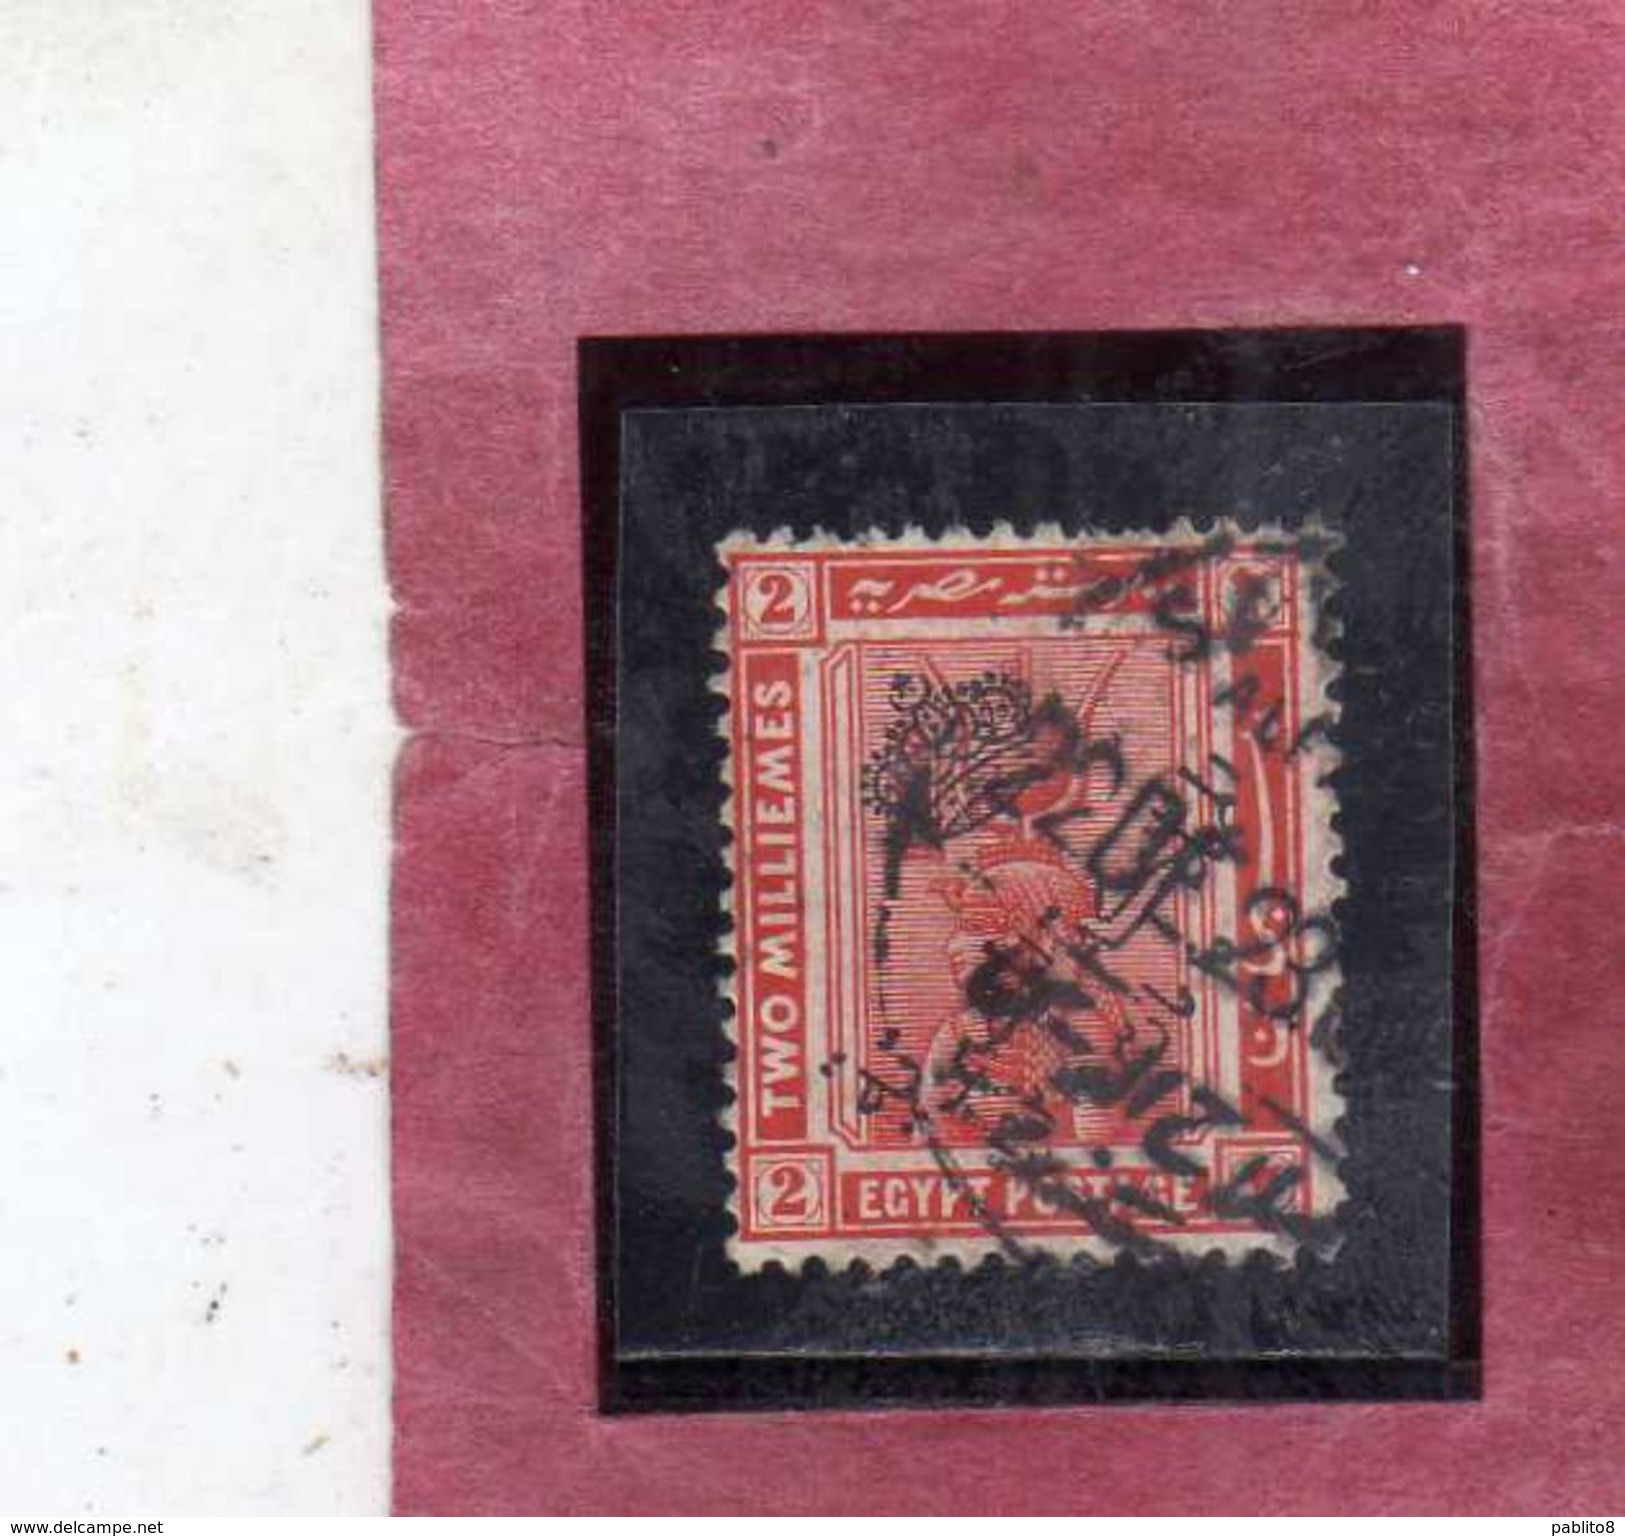 EGYPT EGITTO 1921 1922 CLEOPATRA 2m RED ROSSO ROUGE USATO USED OBLITERE' - 1915-1921 British Protectorate